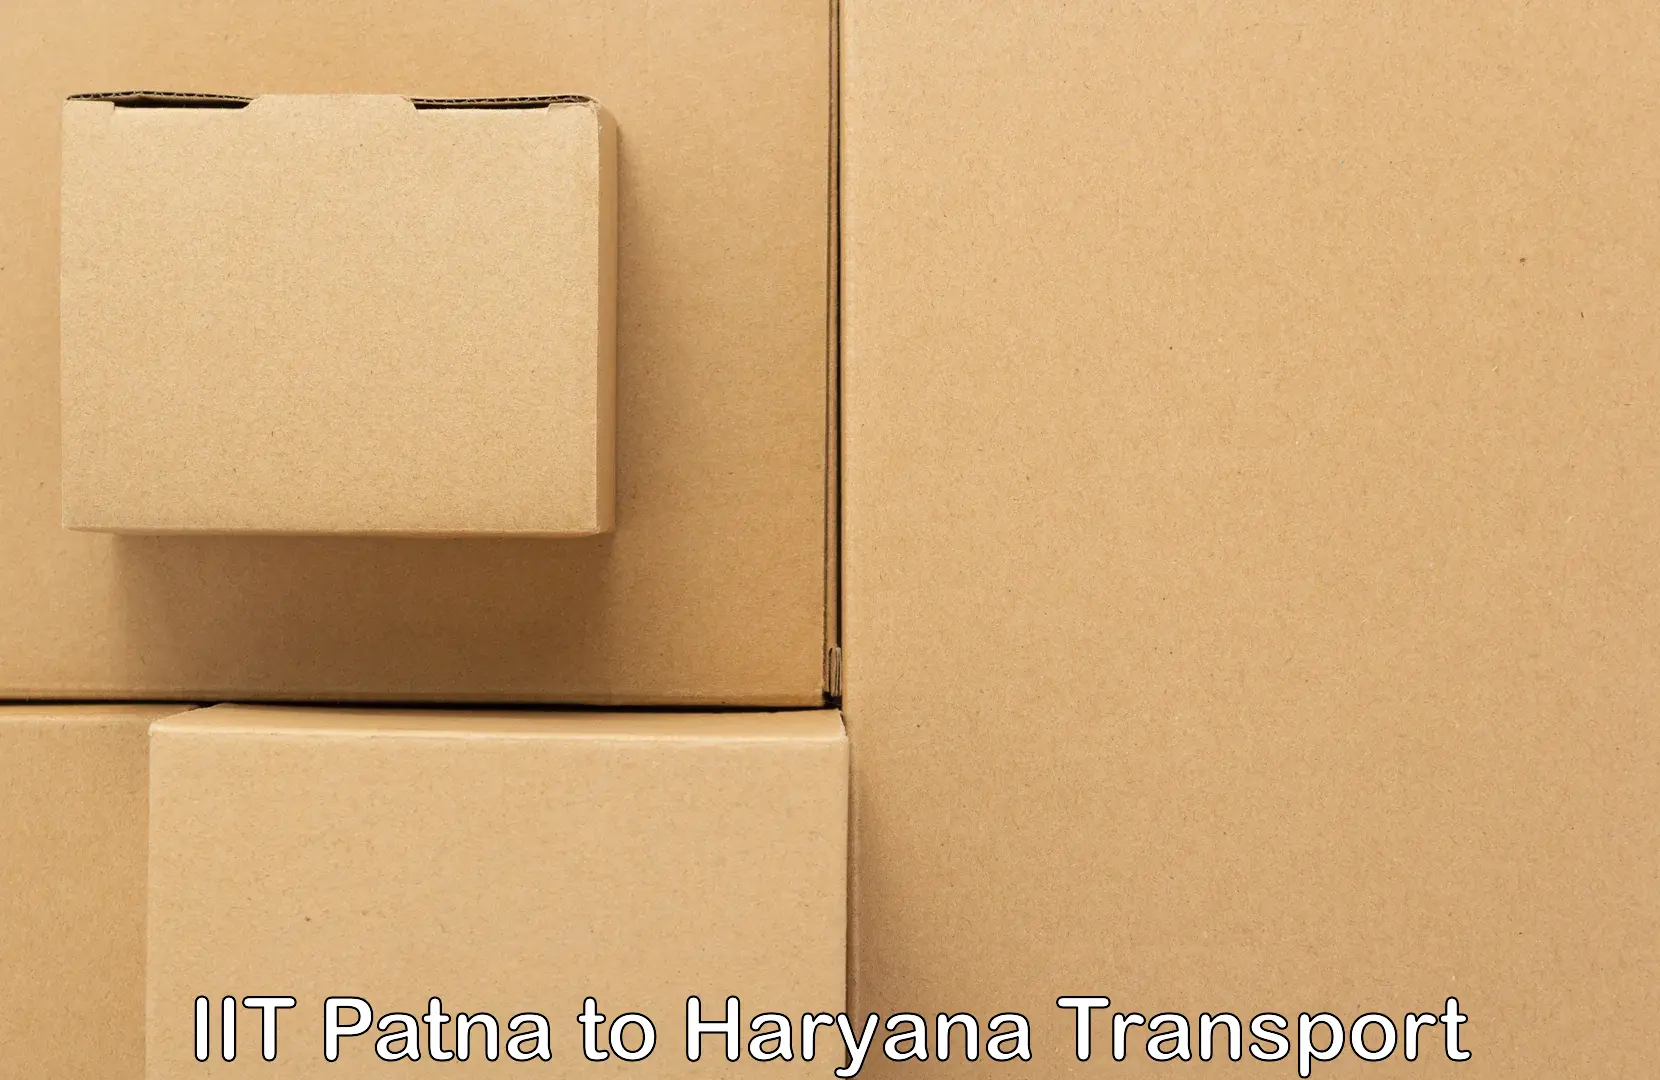 Air freight transport services in IIT Patna to Gurugram